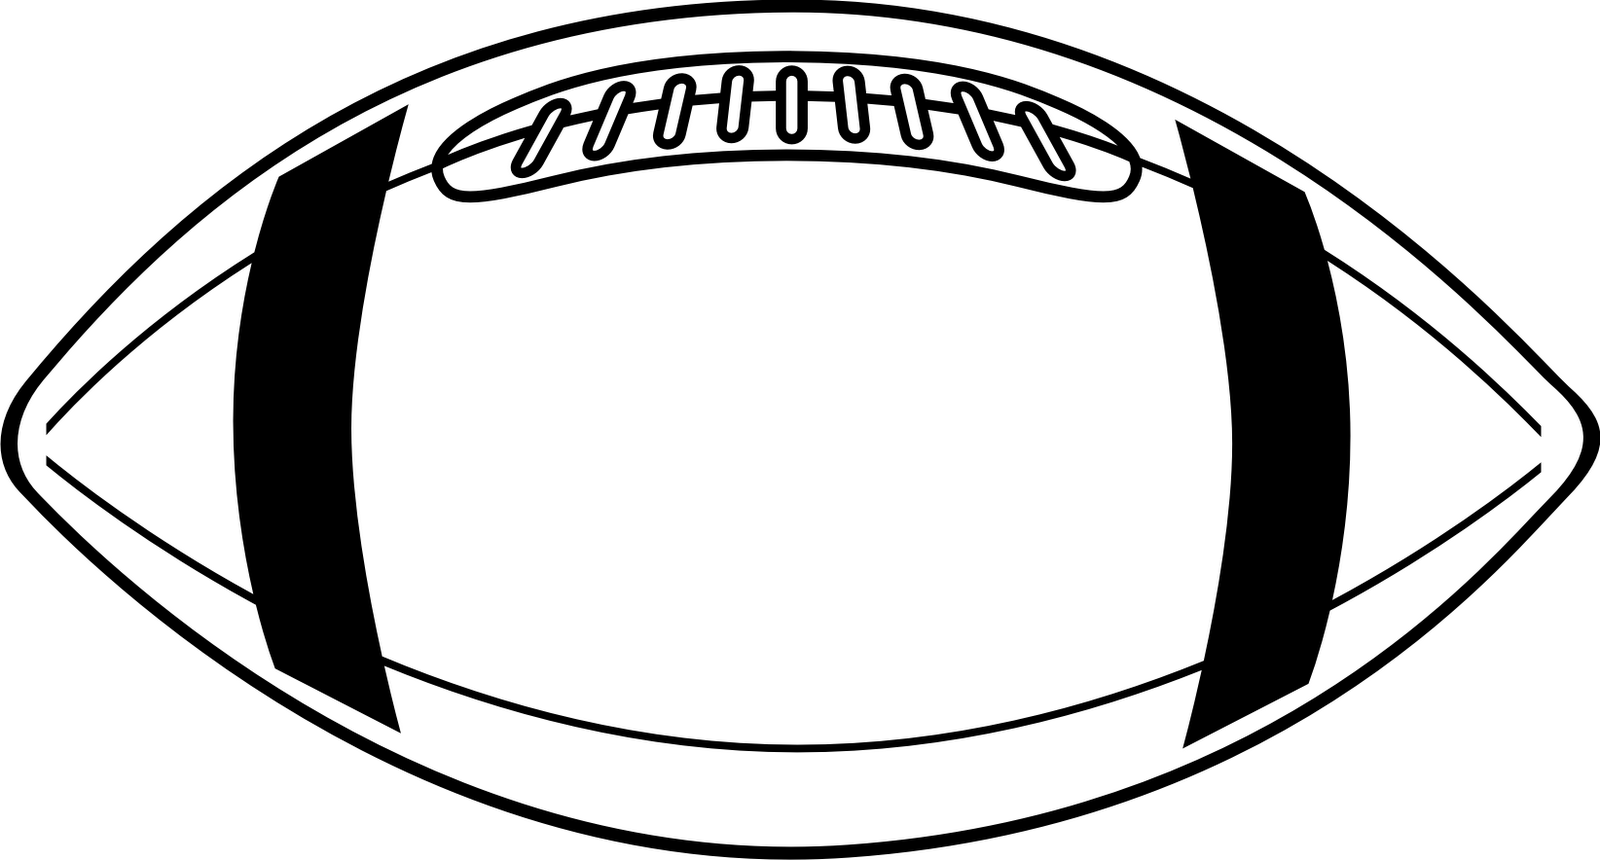 Football jersey football outline image free clipart images image ...